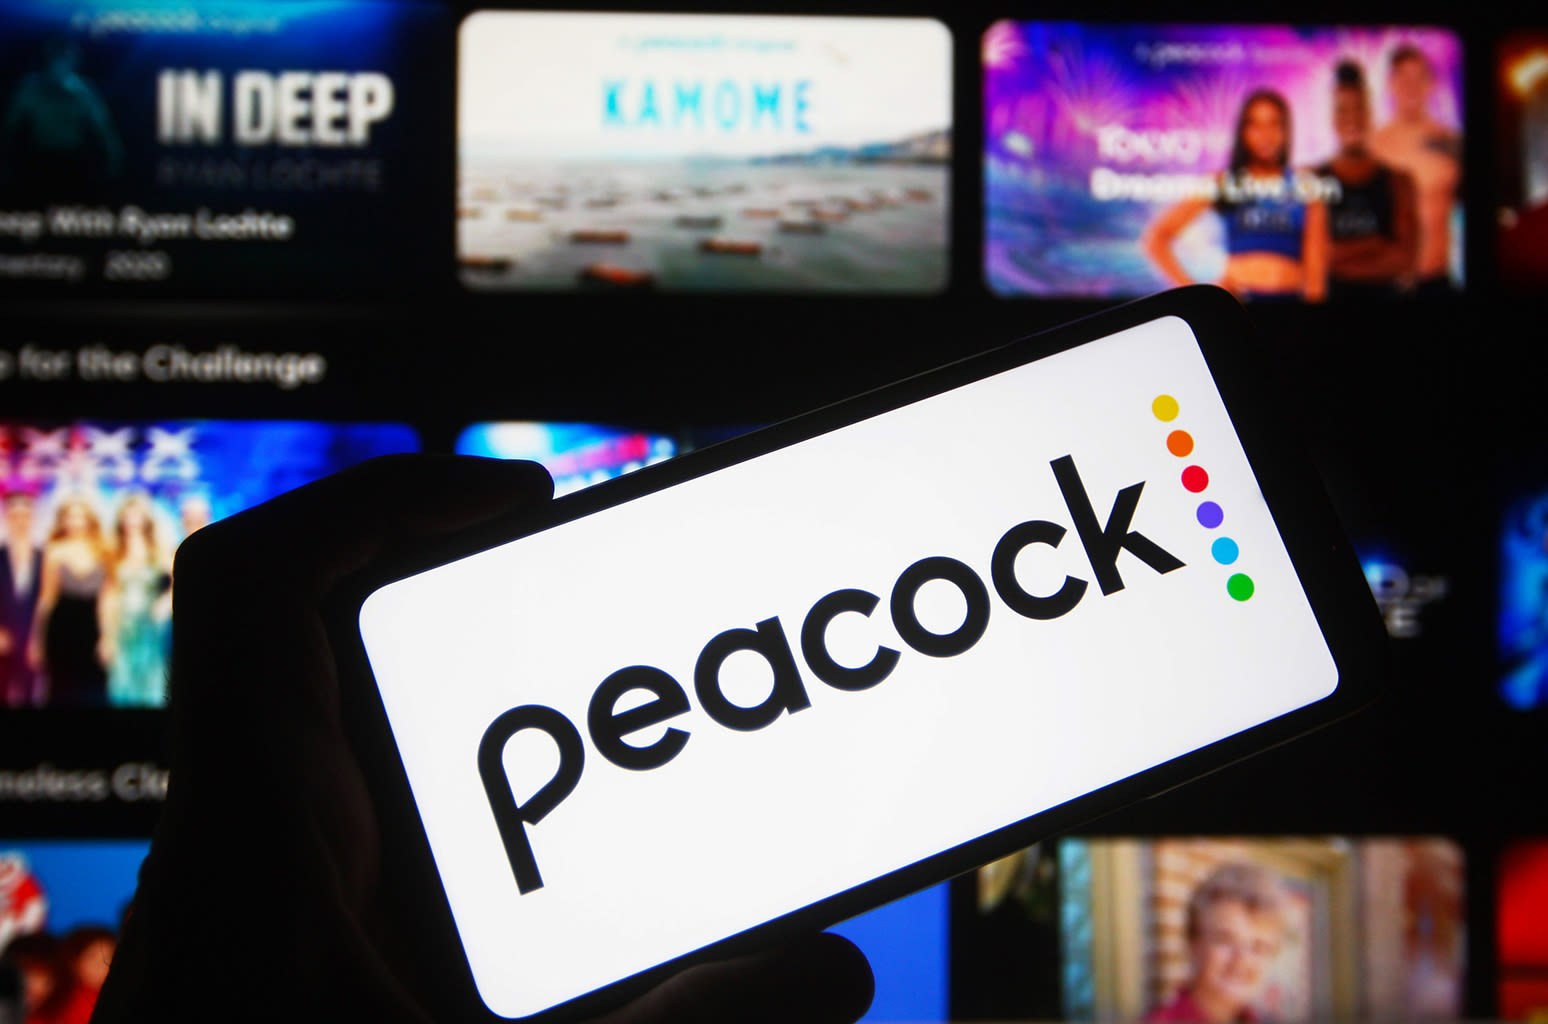 Best Peacock Streaming Deals: Watch the Summer Olympics & More for Just $1.99 a Month